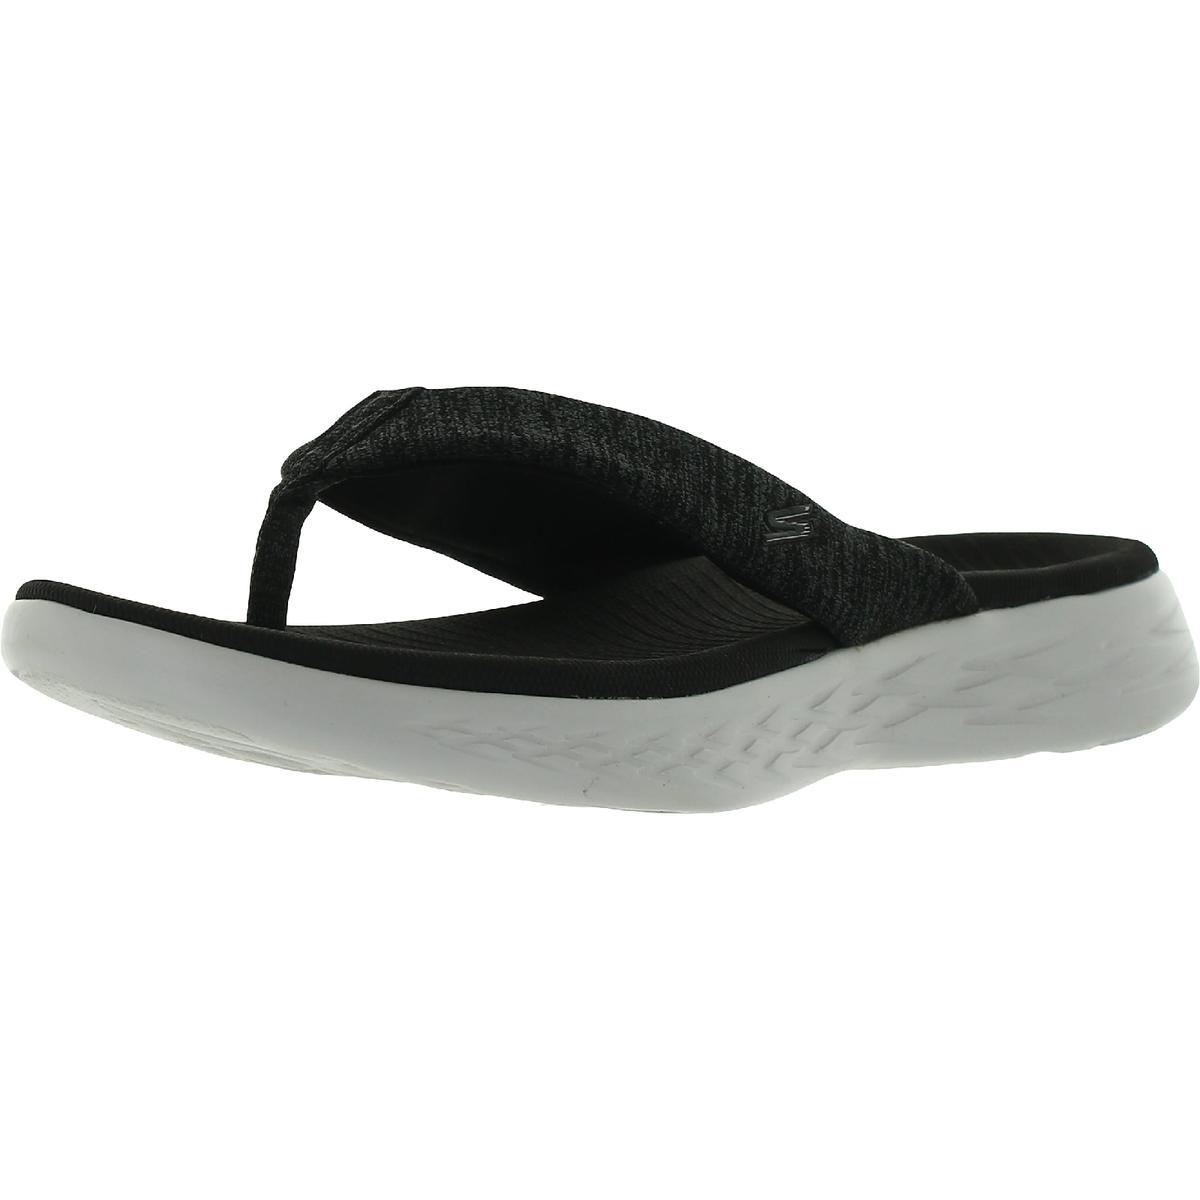 Skechers Womens Slip On Padded Insole Outdoors Slide Sandals Shoes Bhfo 6580 Black/White